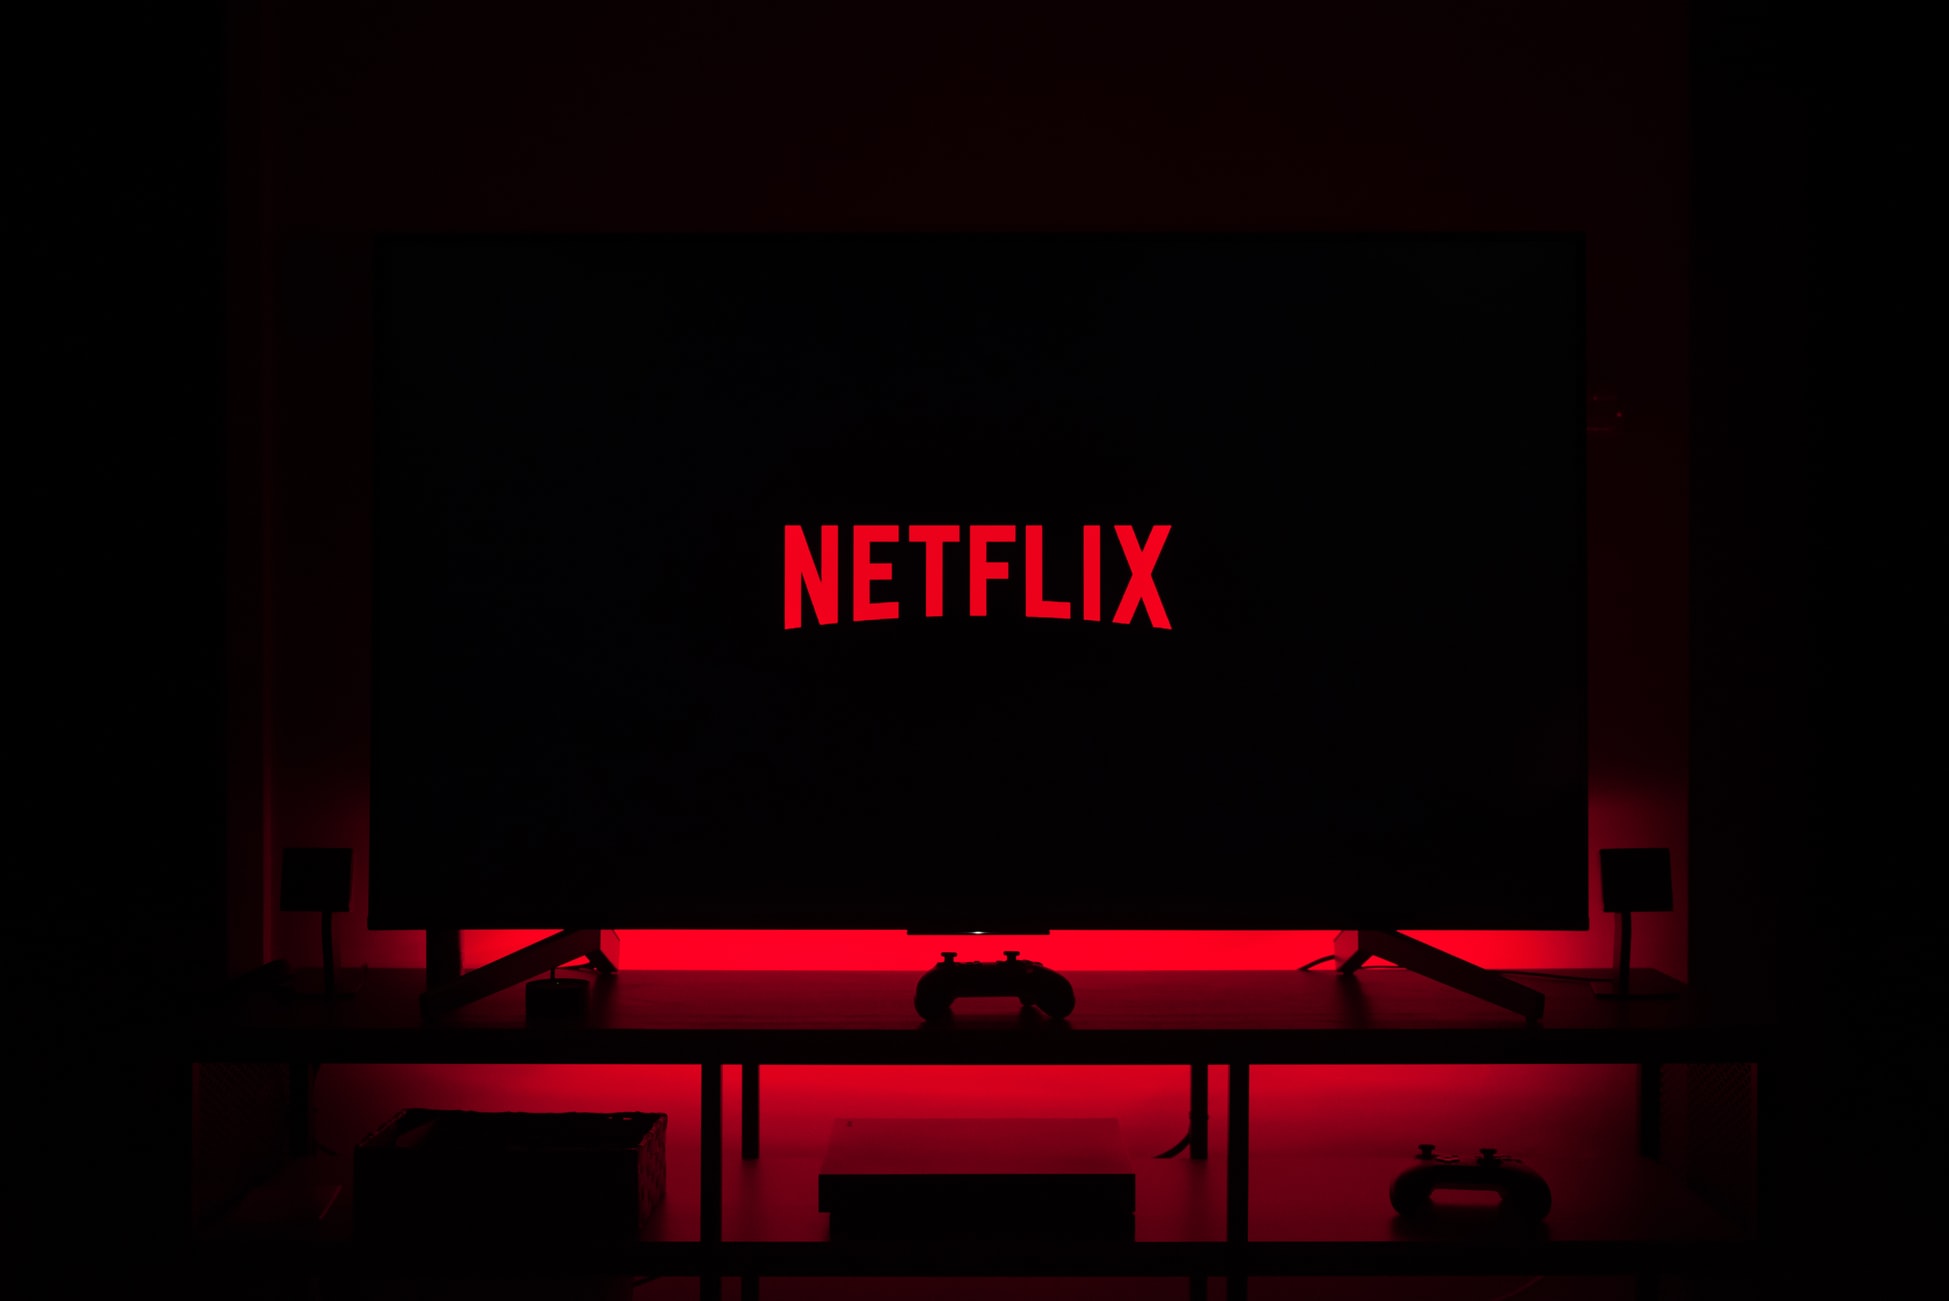 Netflix: Prices cut across its streaming plans in India